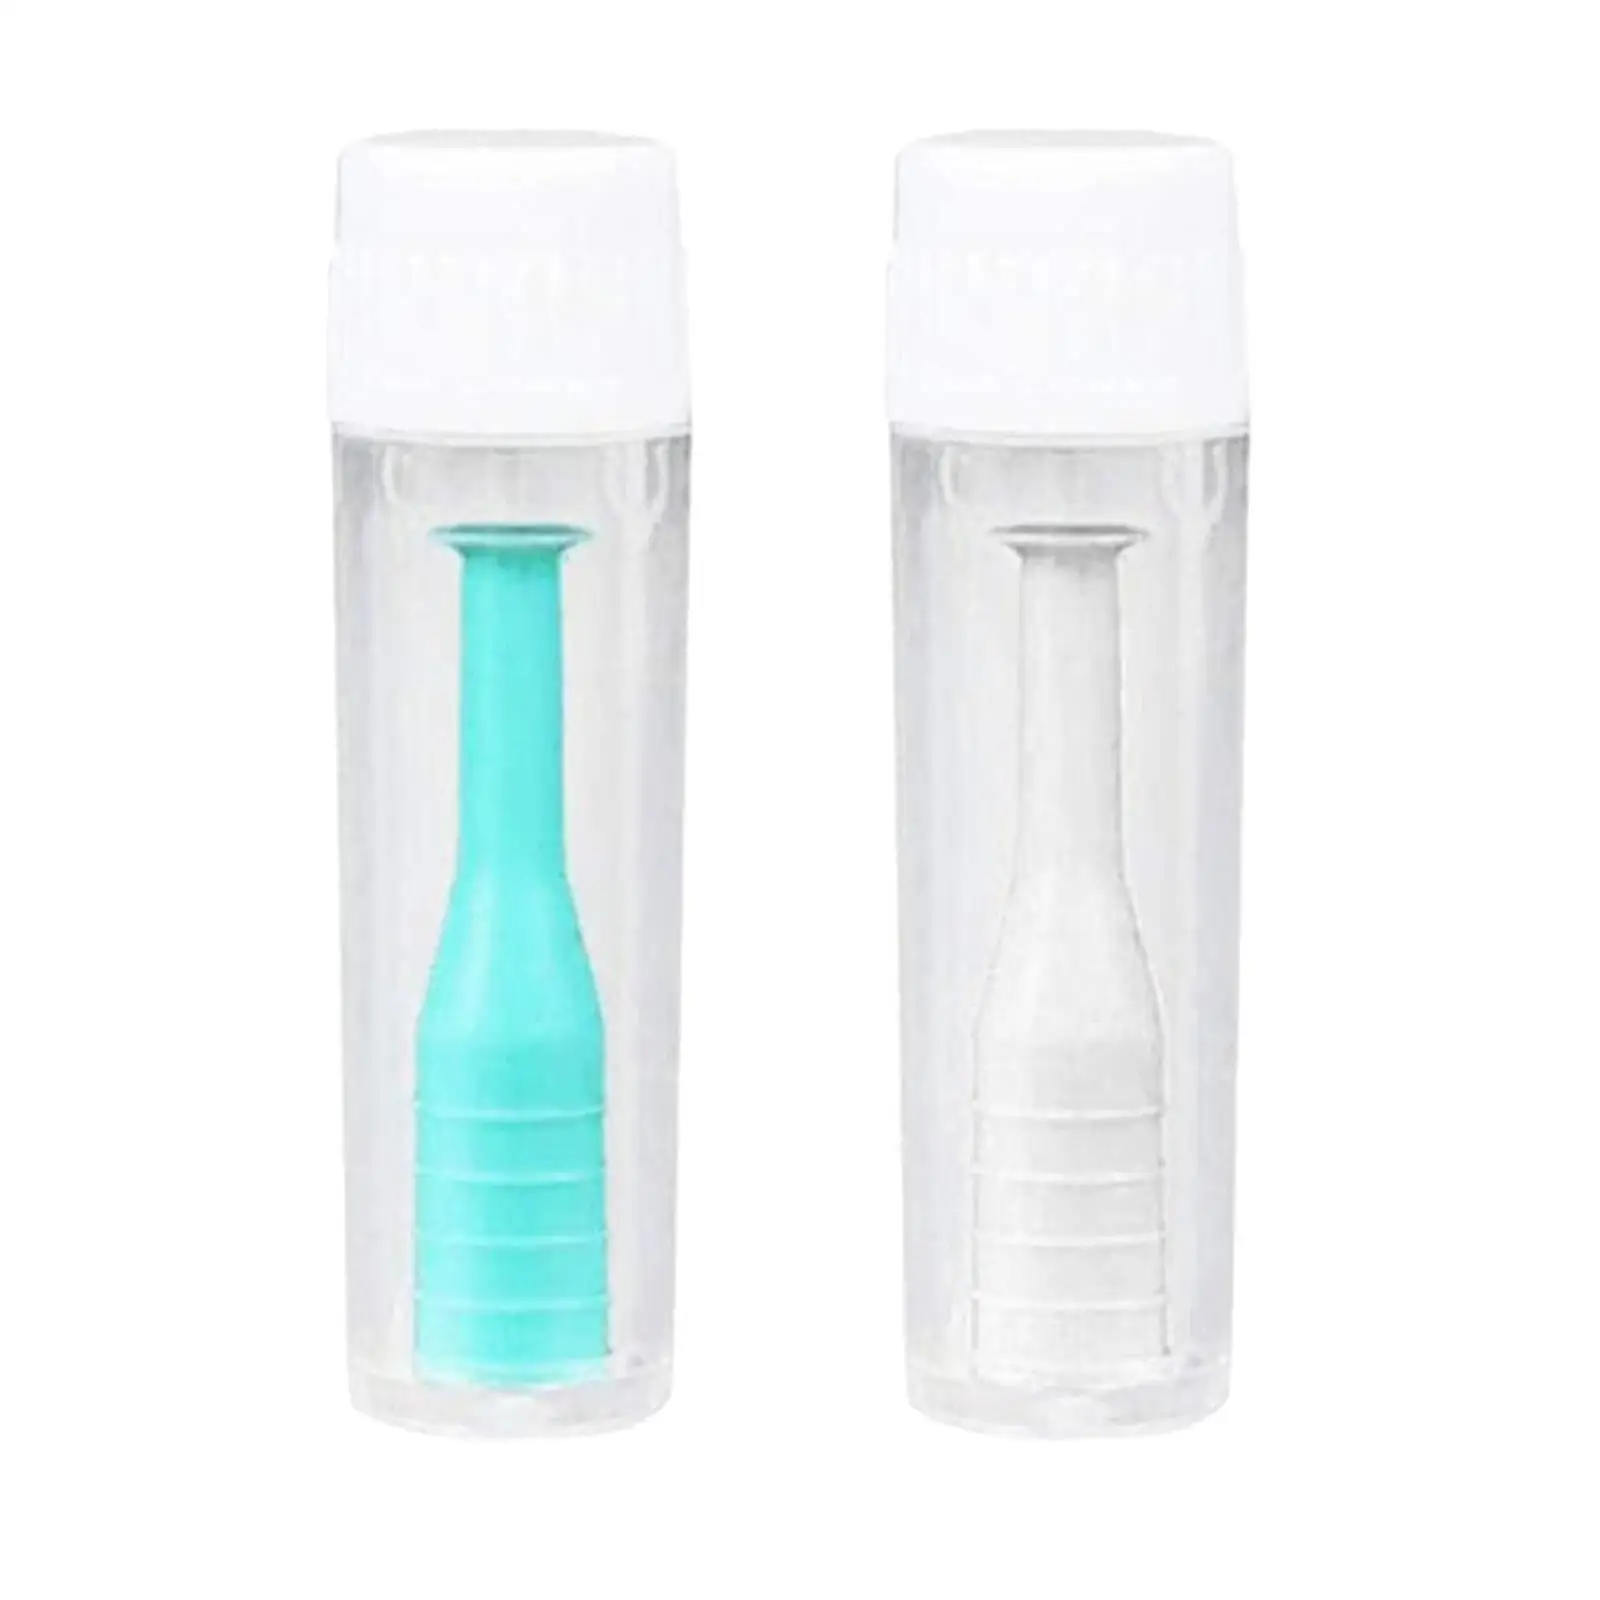 Soft Hard Contact Lens Remover Suction Stick Extractor Applicator Device RGP